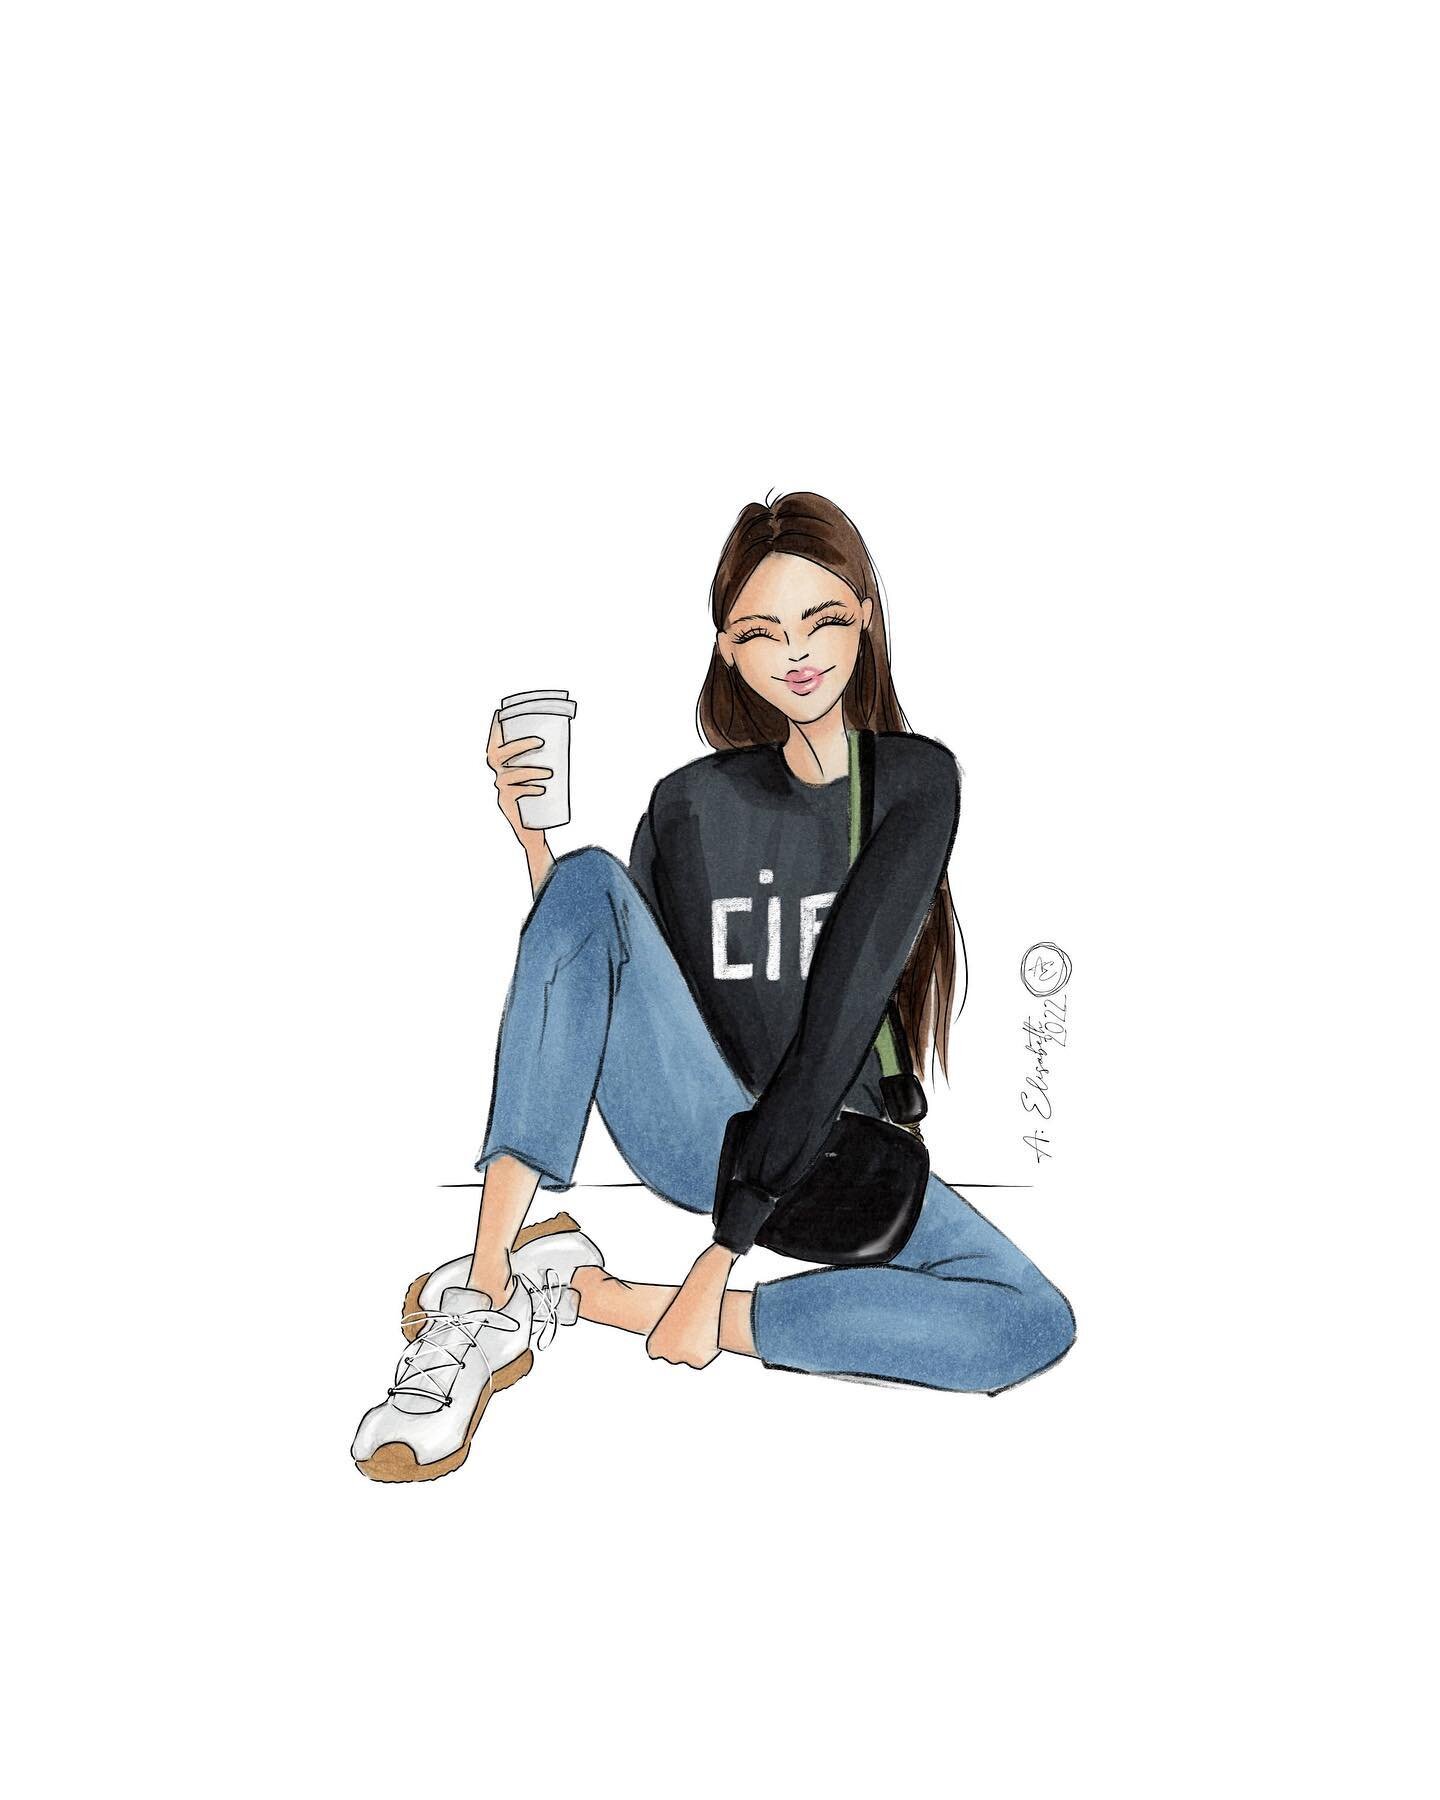 Feeling casual today, and ready for the weekend! 

#weekendready #happyfriday #casualfriday #fashionillustration #fashionart #clarev